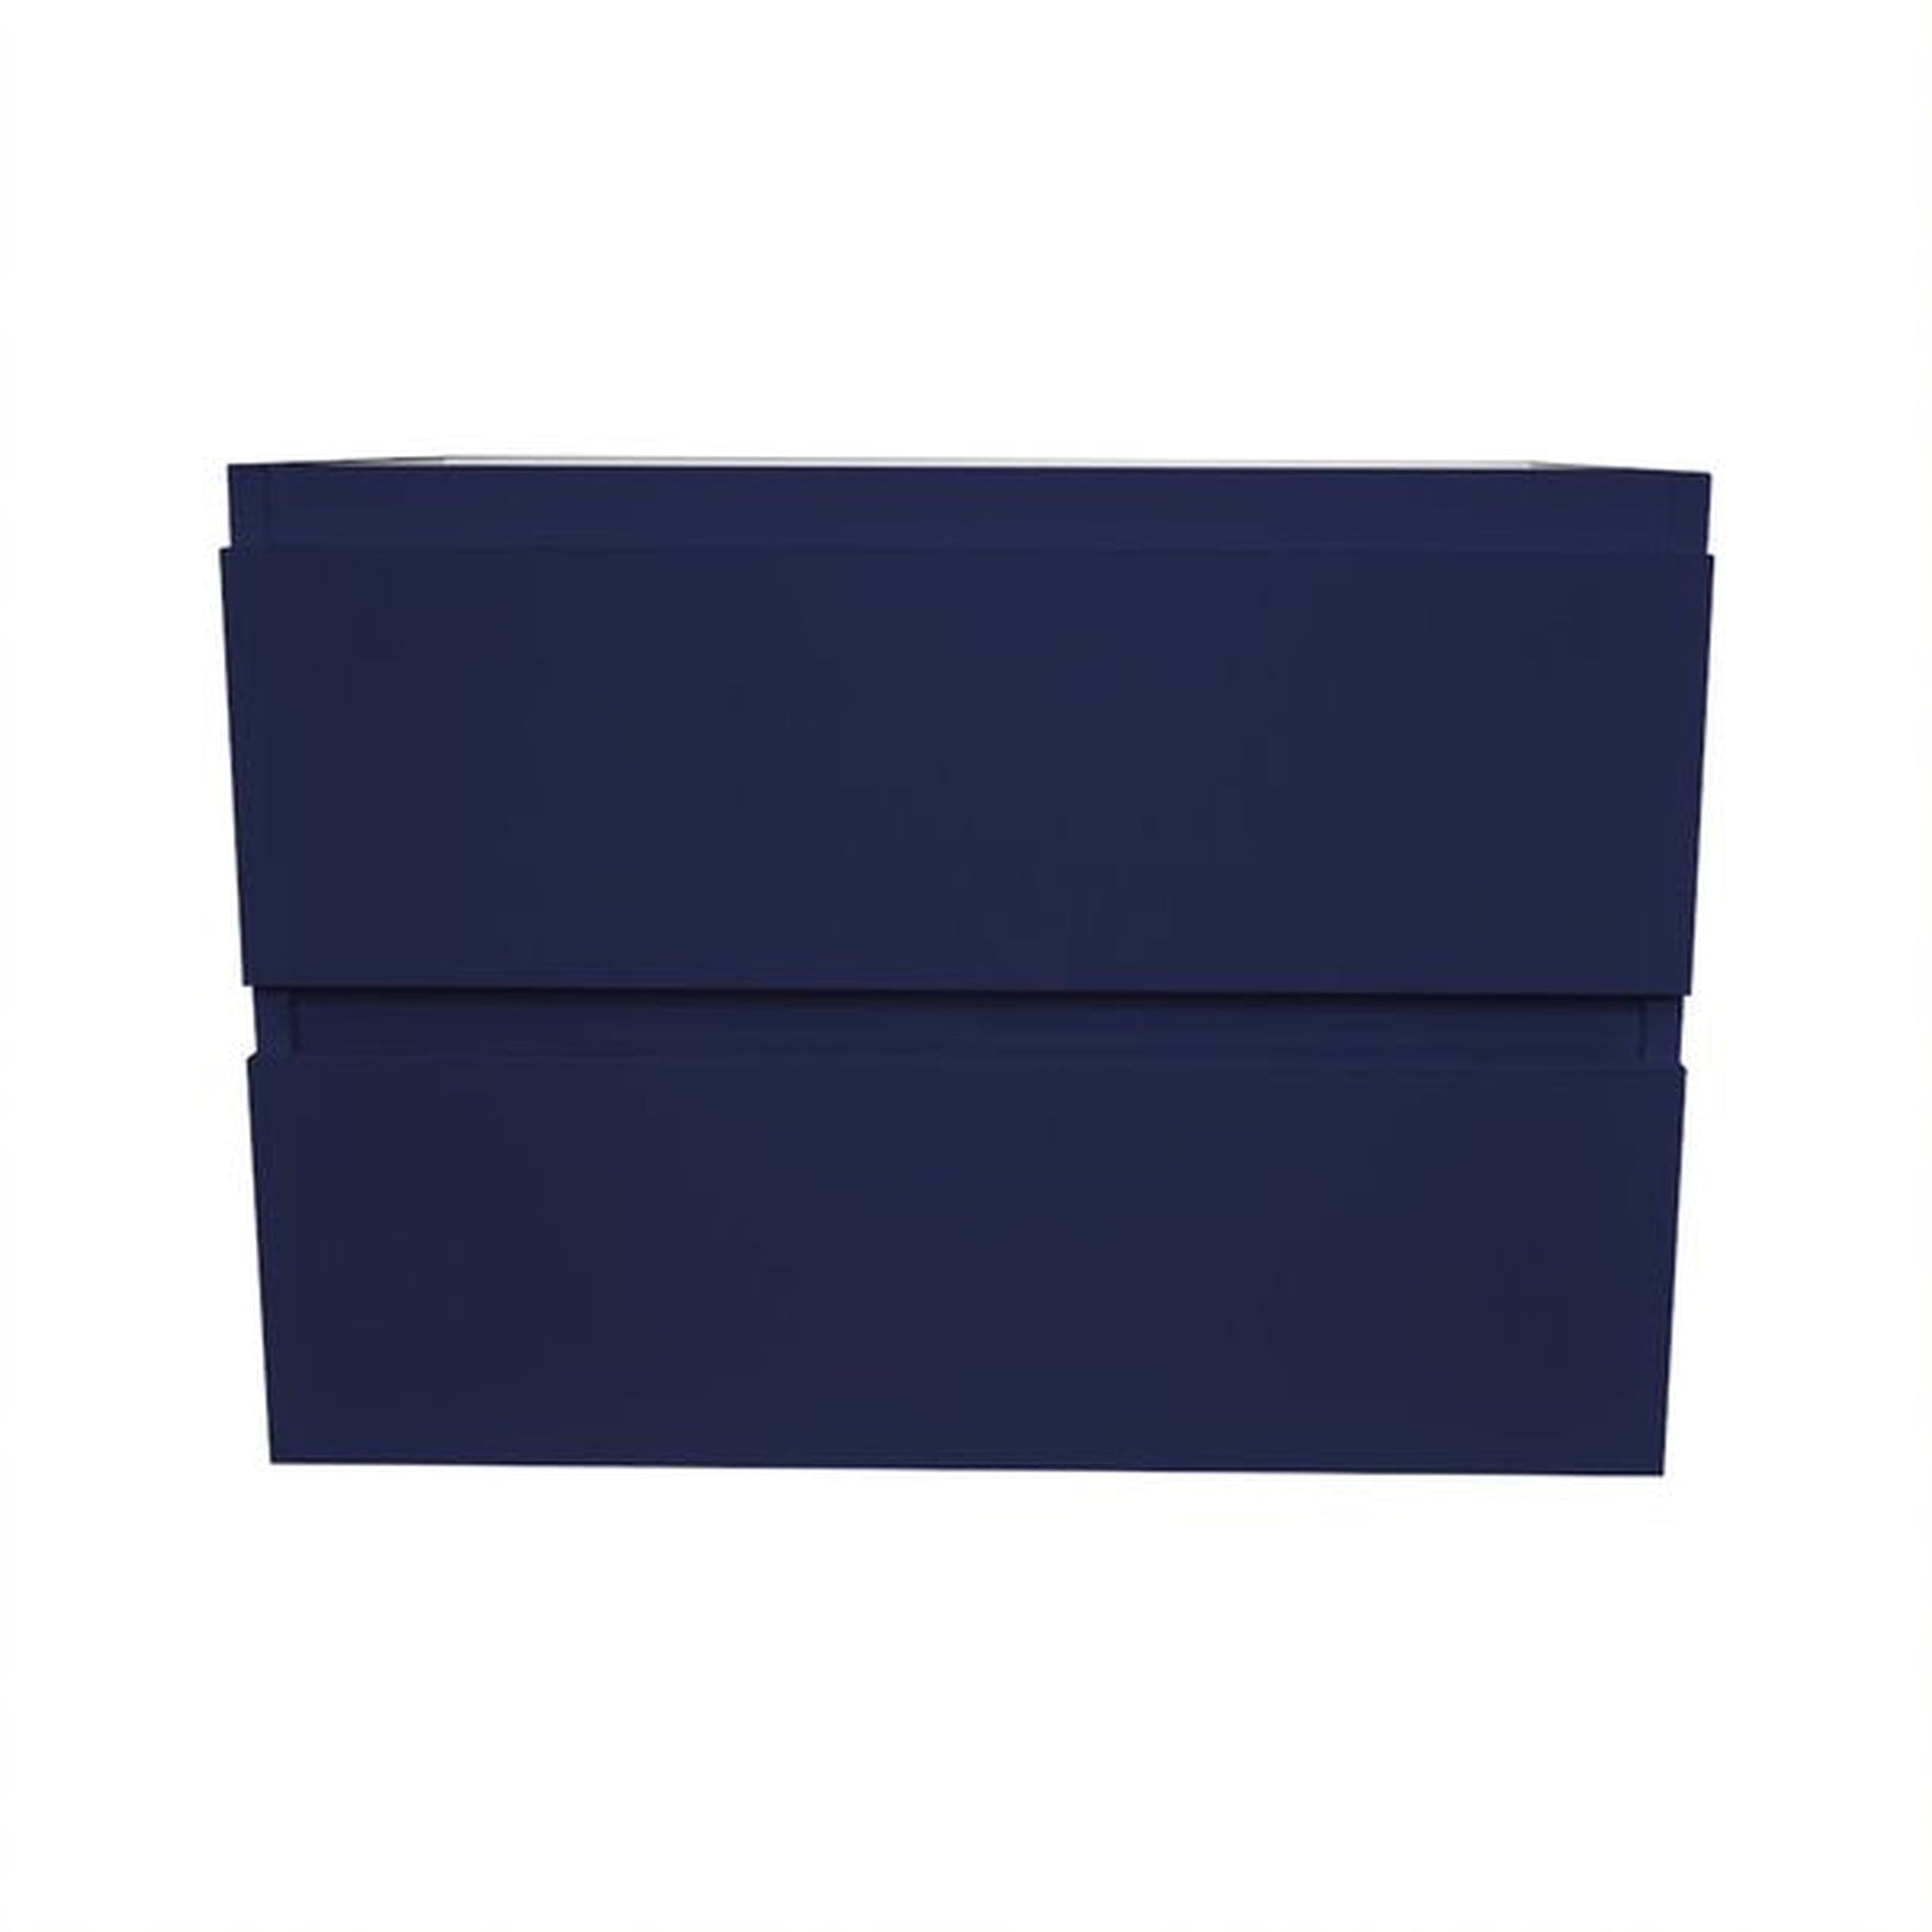 Volpa USA Salt 24" x 18" Navy Wall-Mounted Floating Bathroom Vanity Cabinet with Drawers